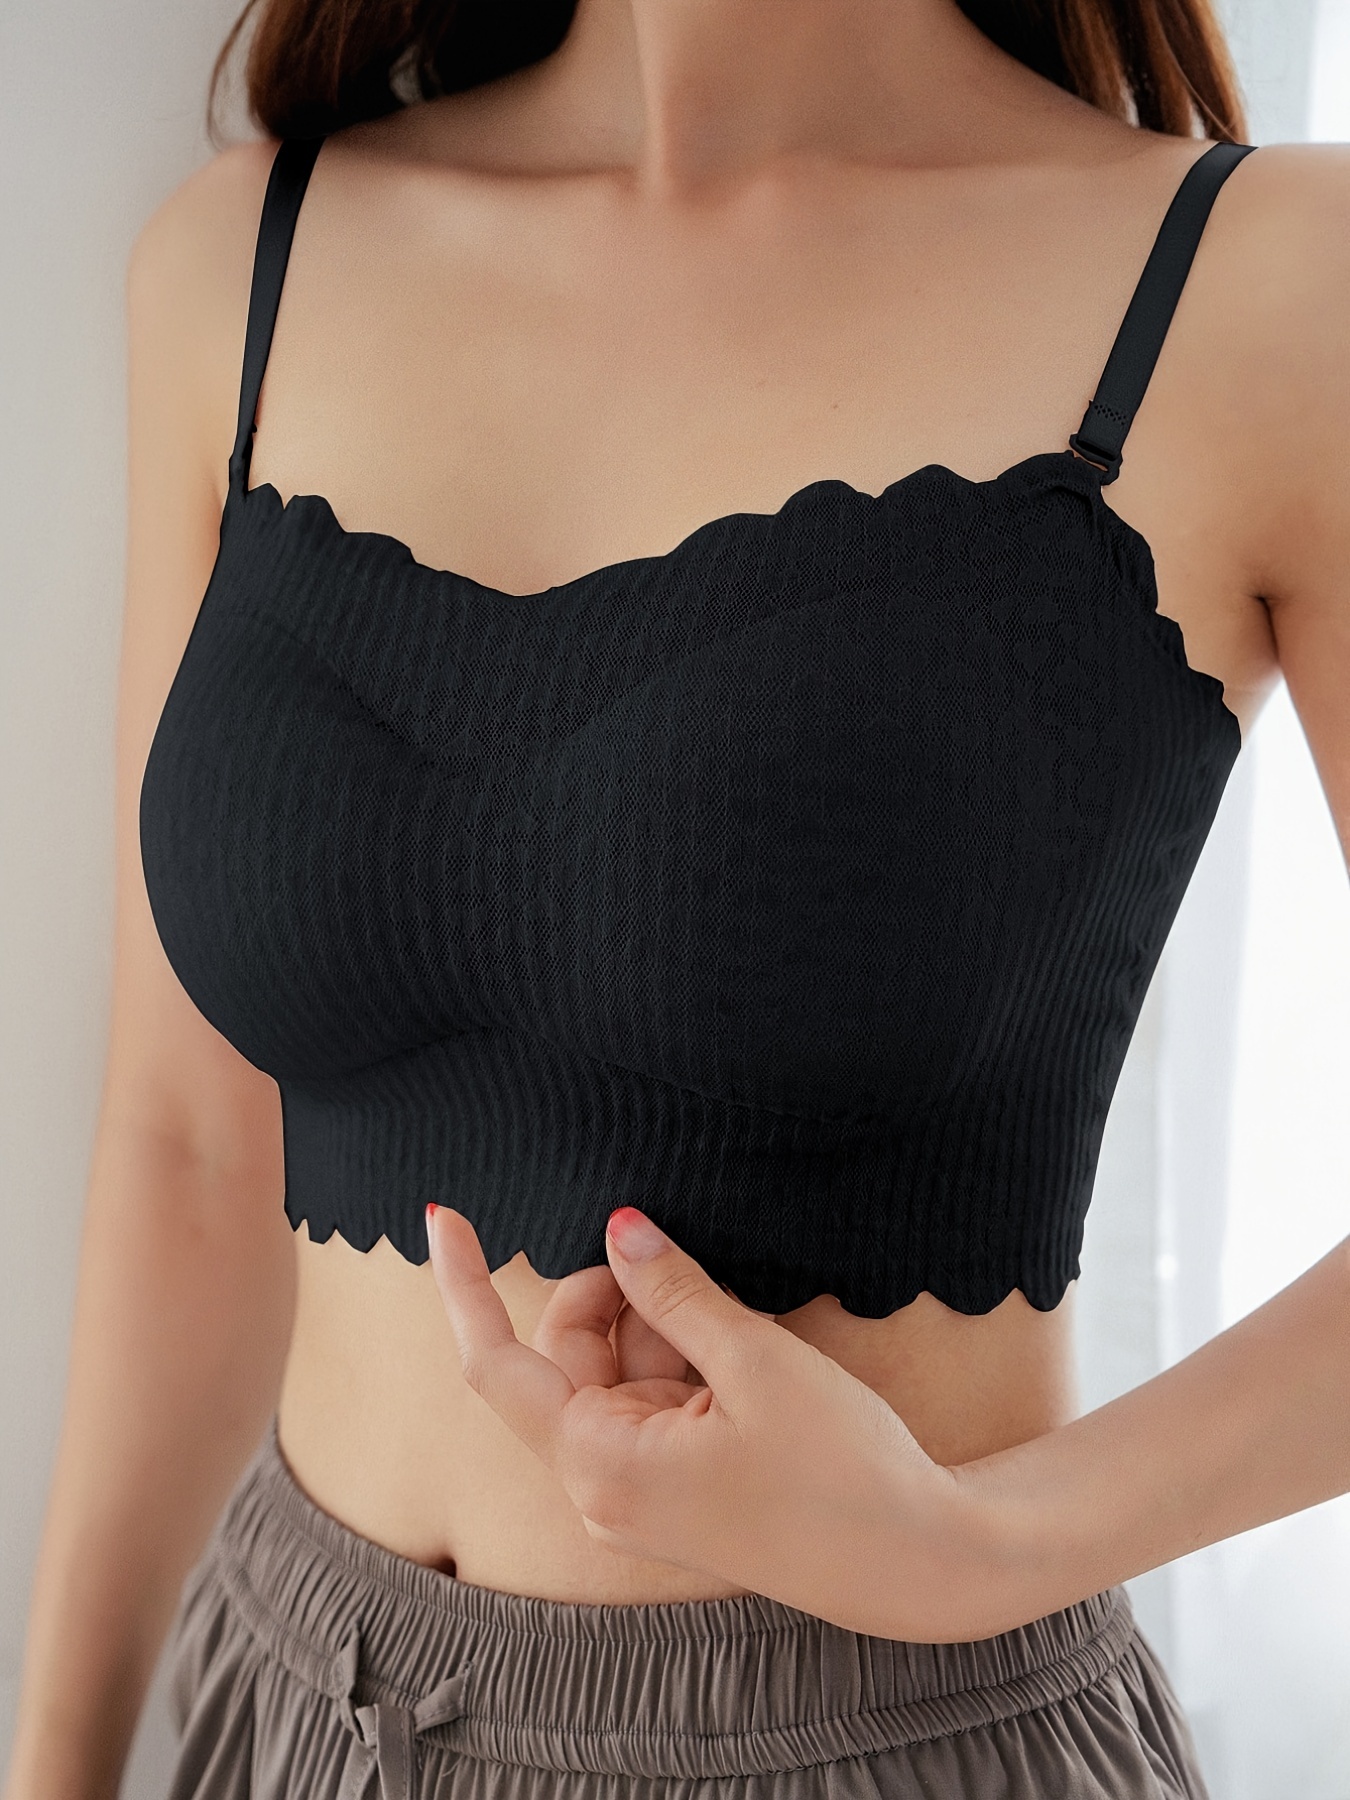 Solid Scallop Trim Cami Crop Top: Save up to 50%!